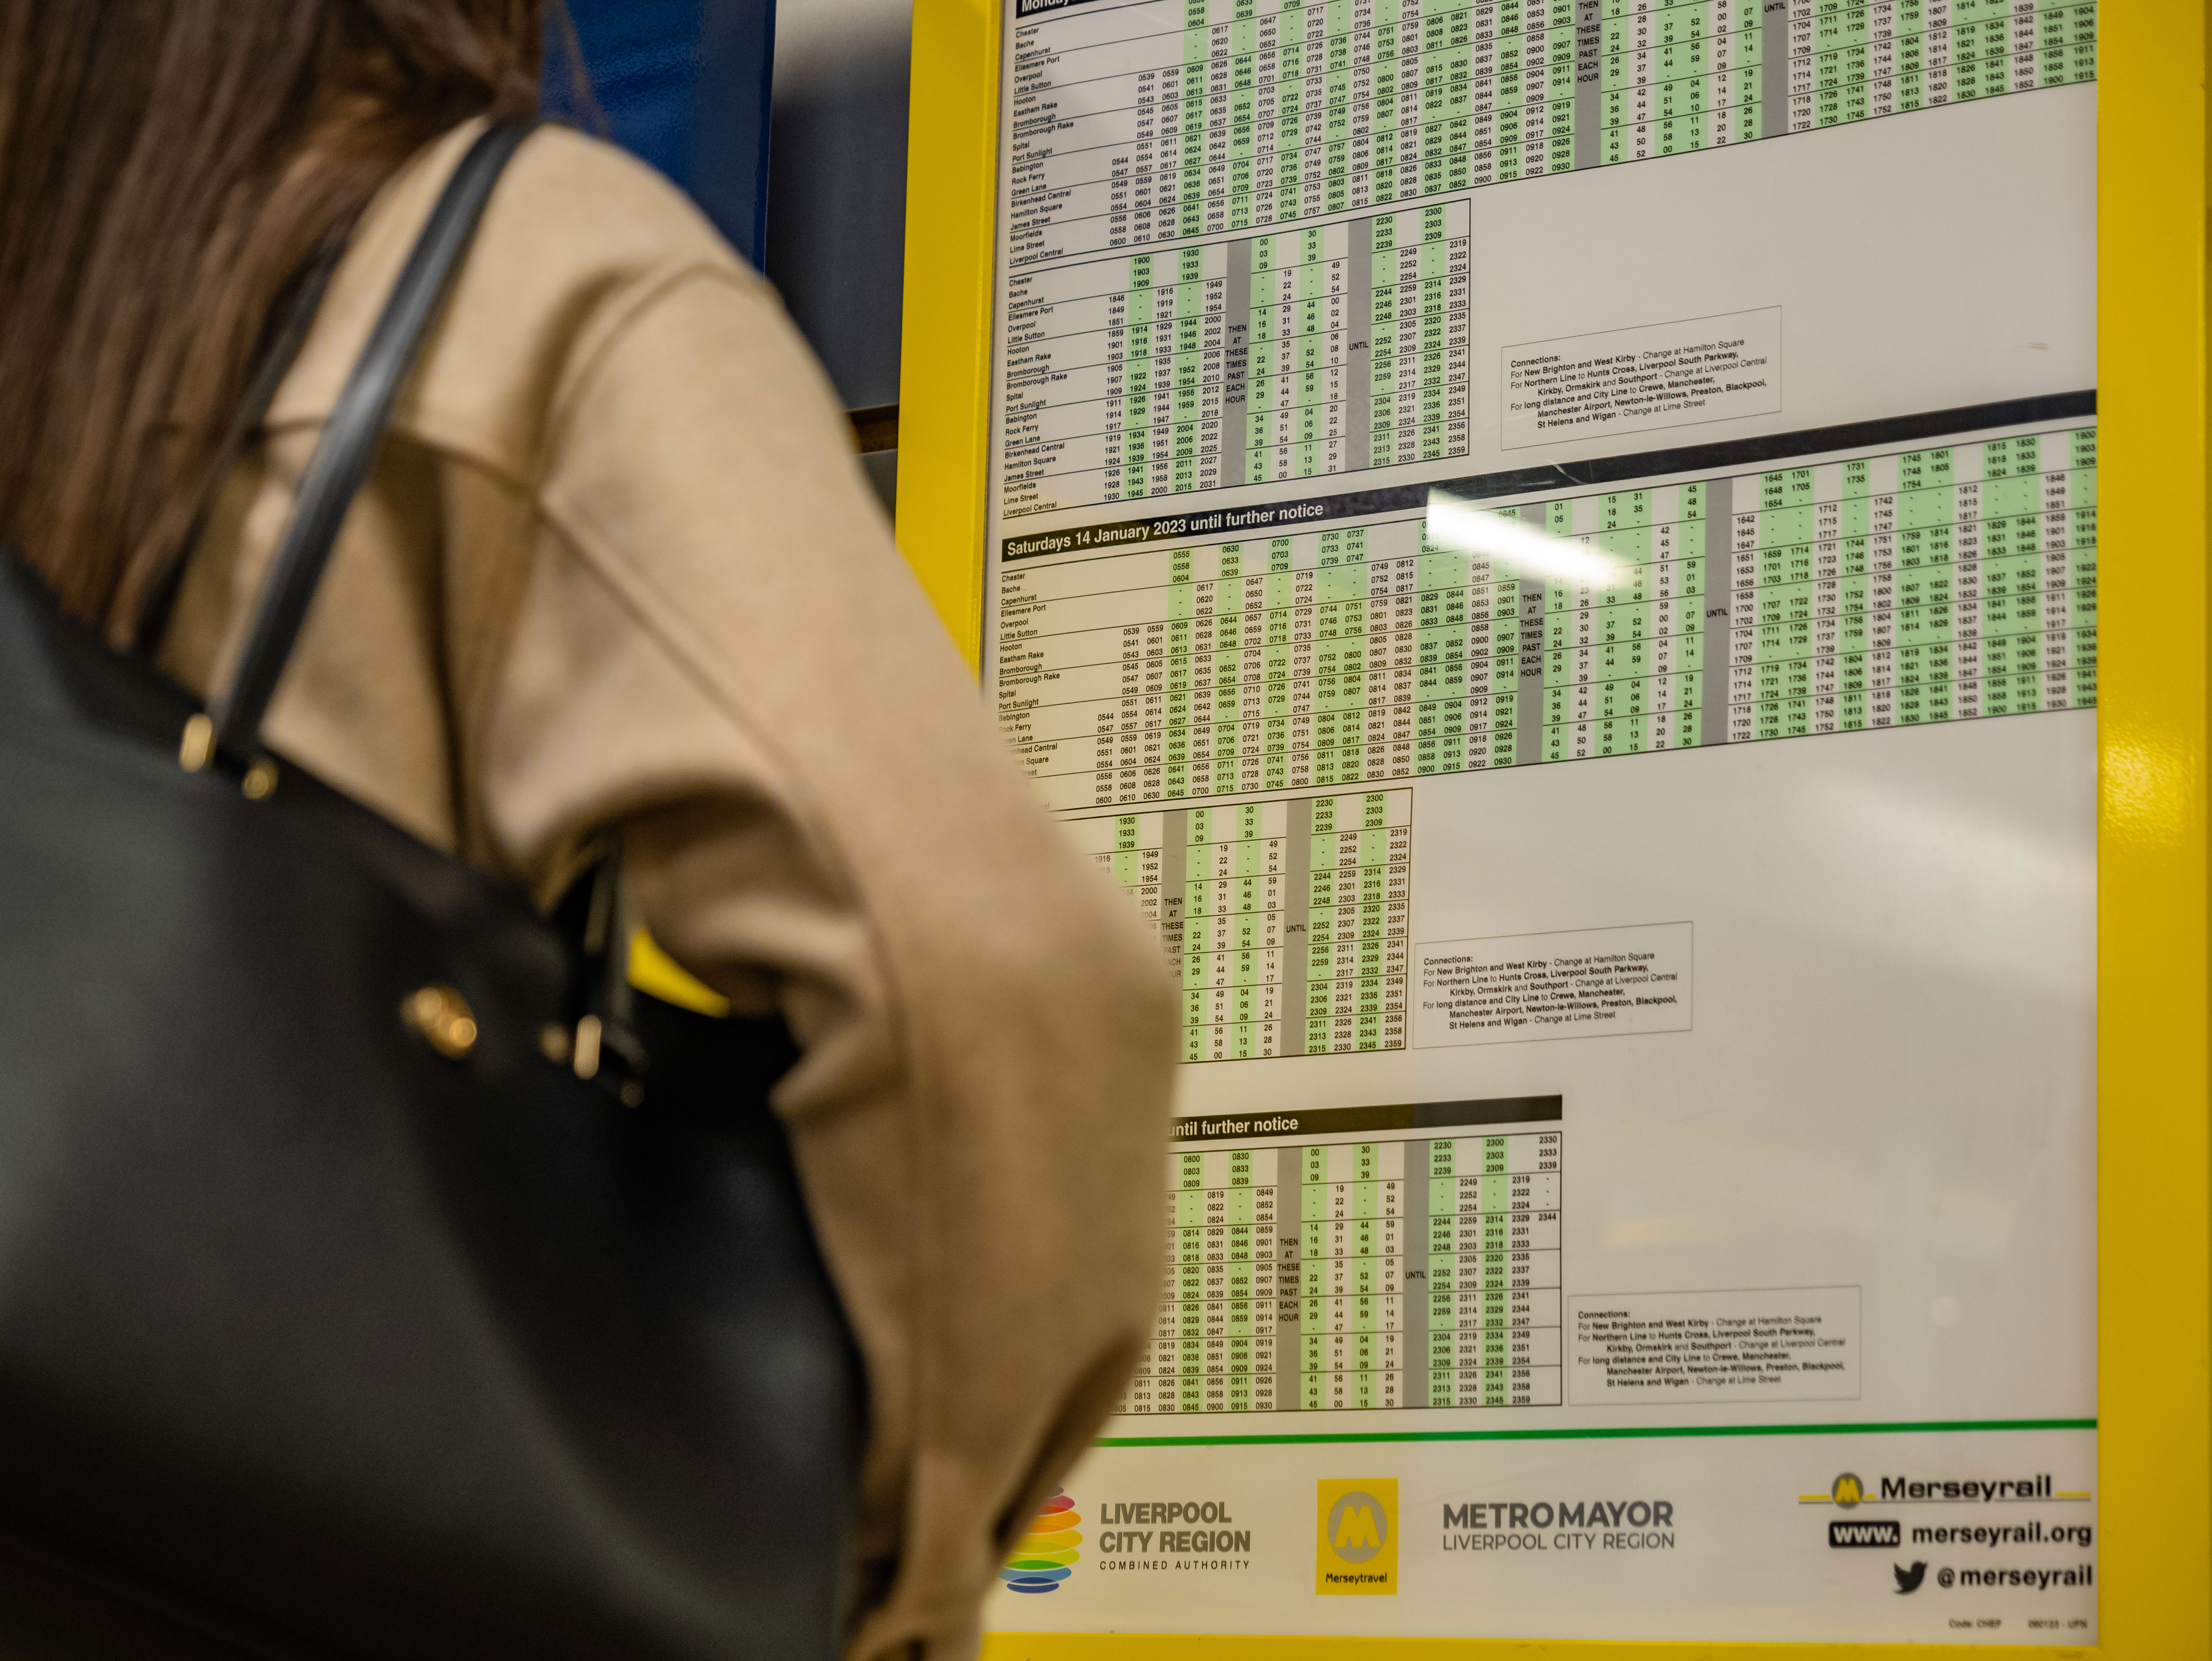 A passenger looking at timetables.